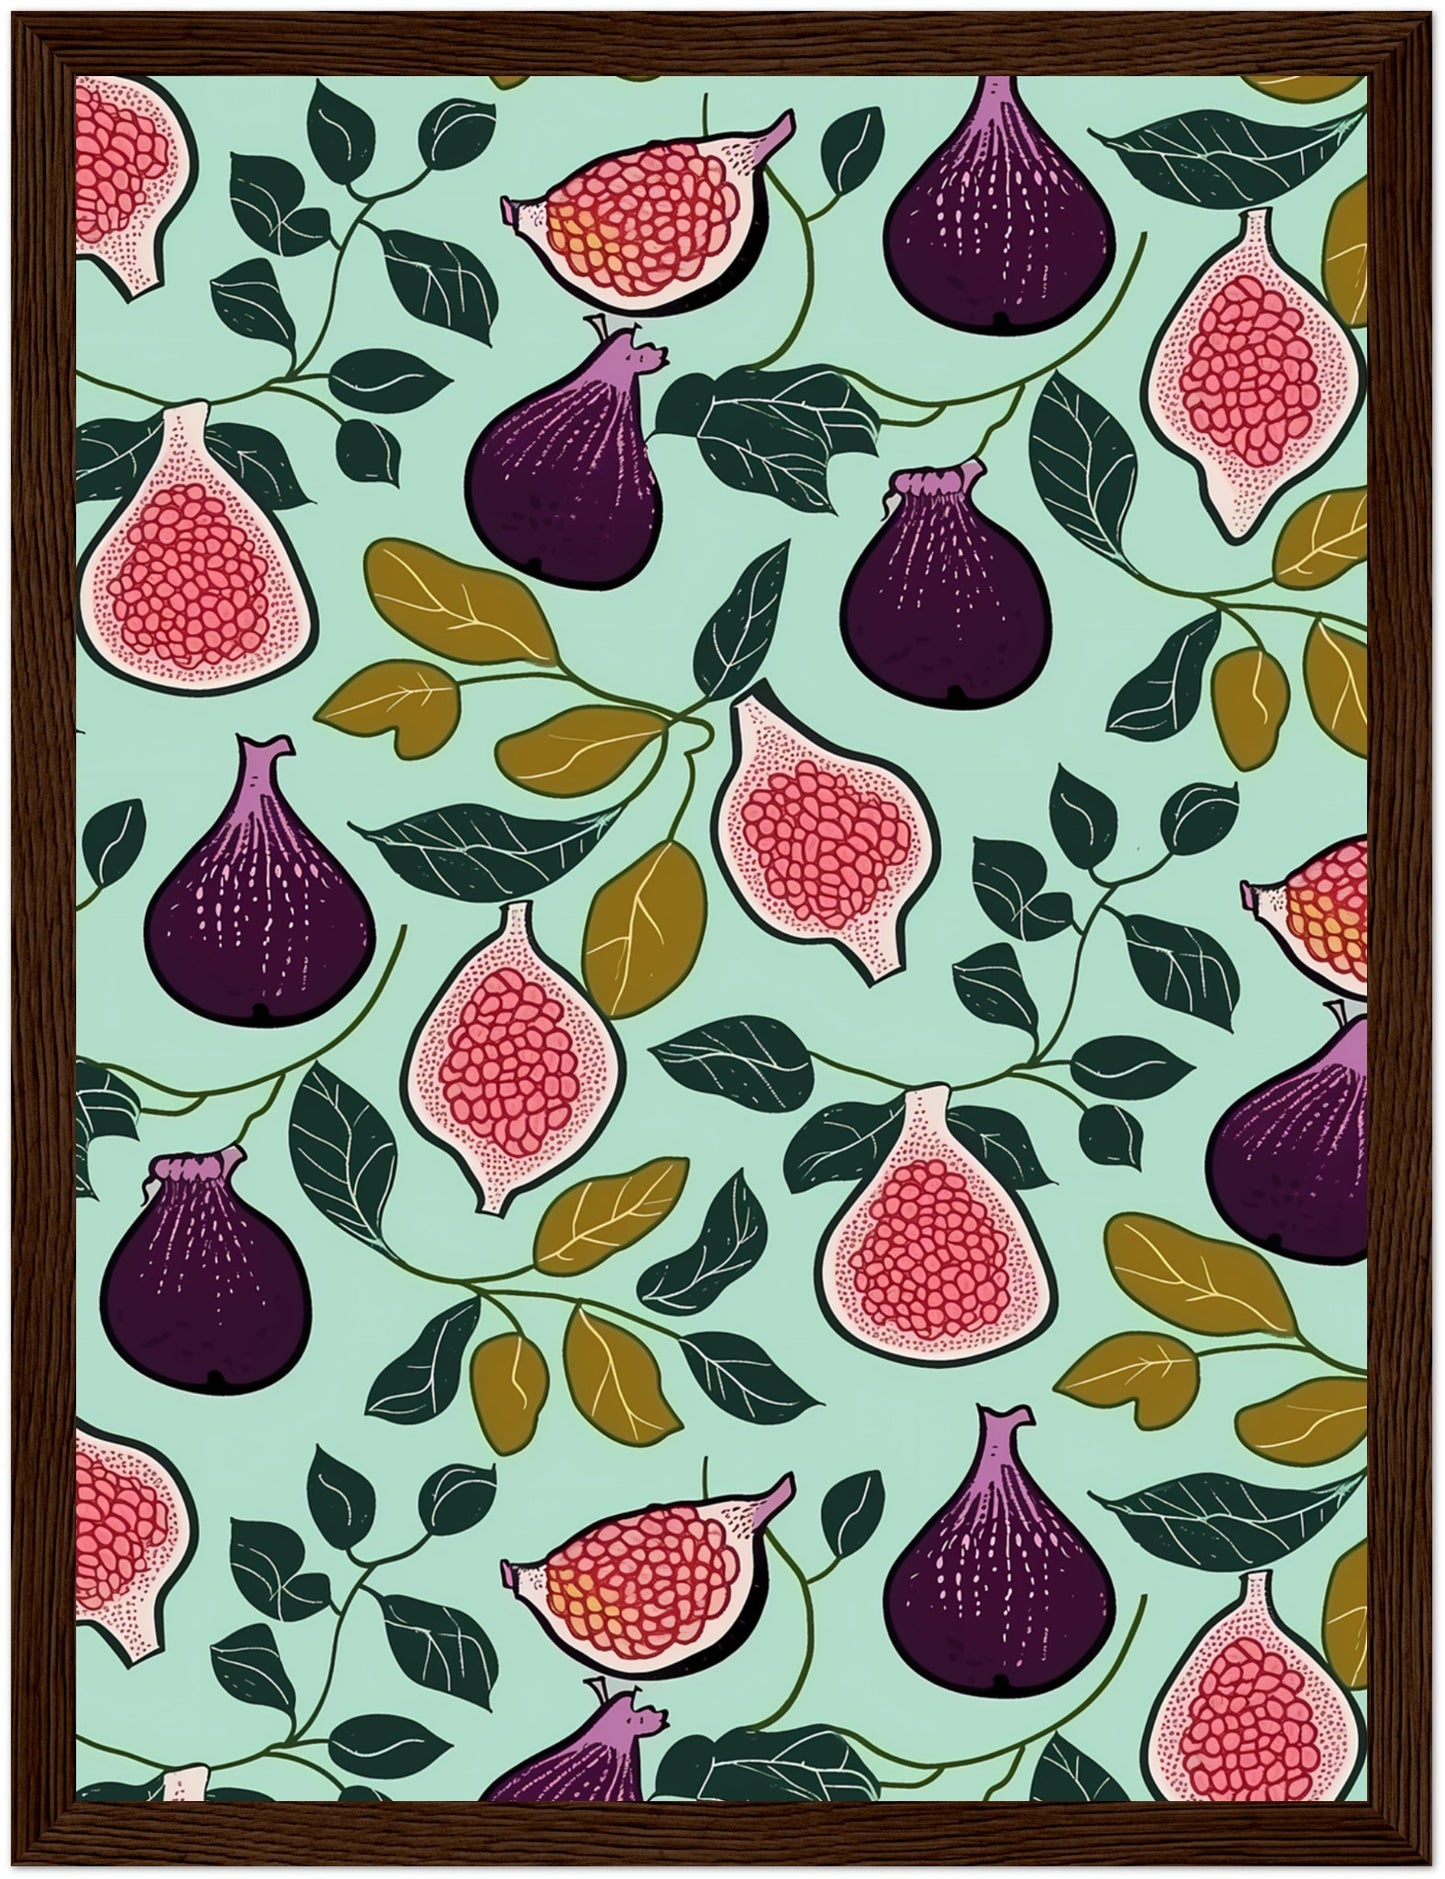 A colorful illustration of figs and pomegranates with leaves on a teal background, framed by a brown border.